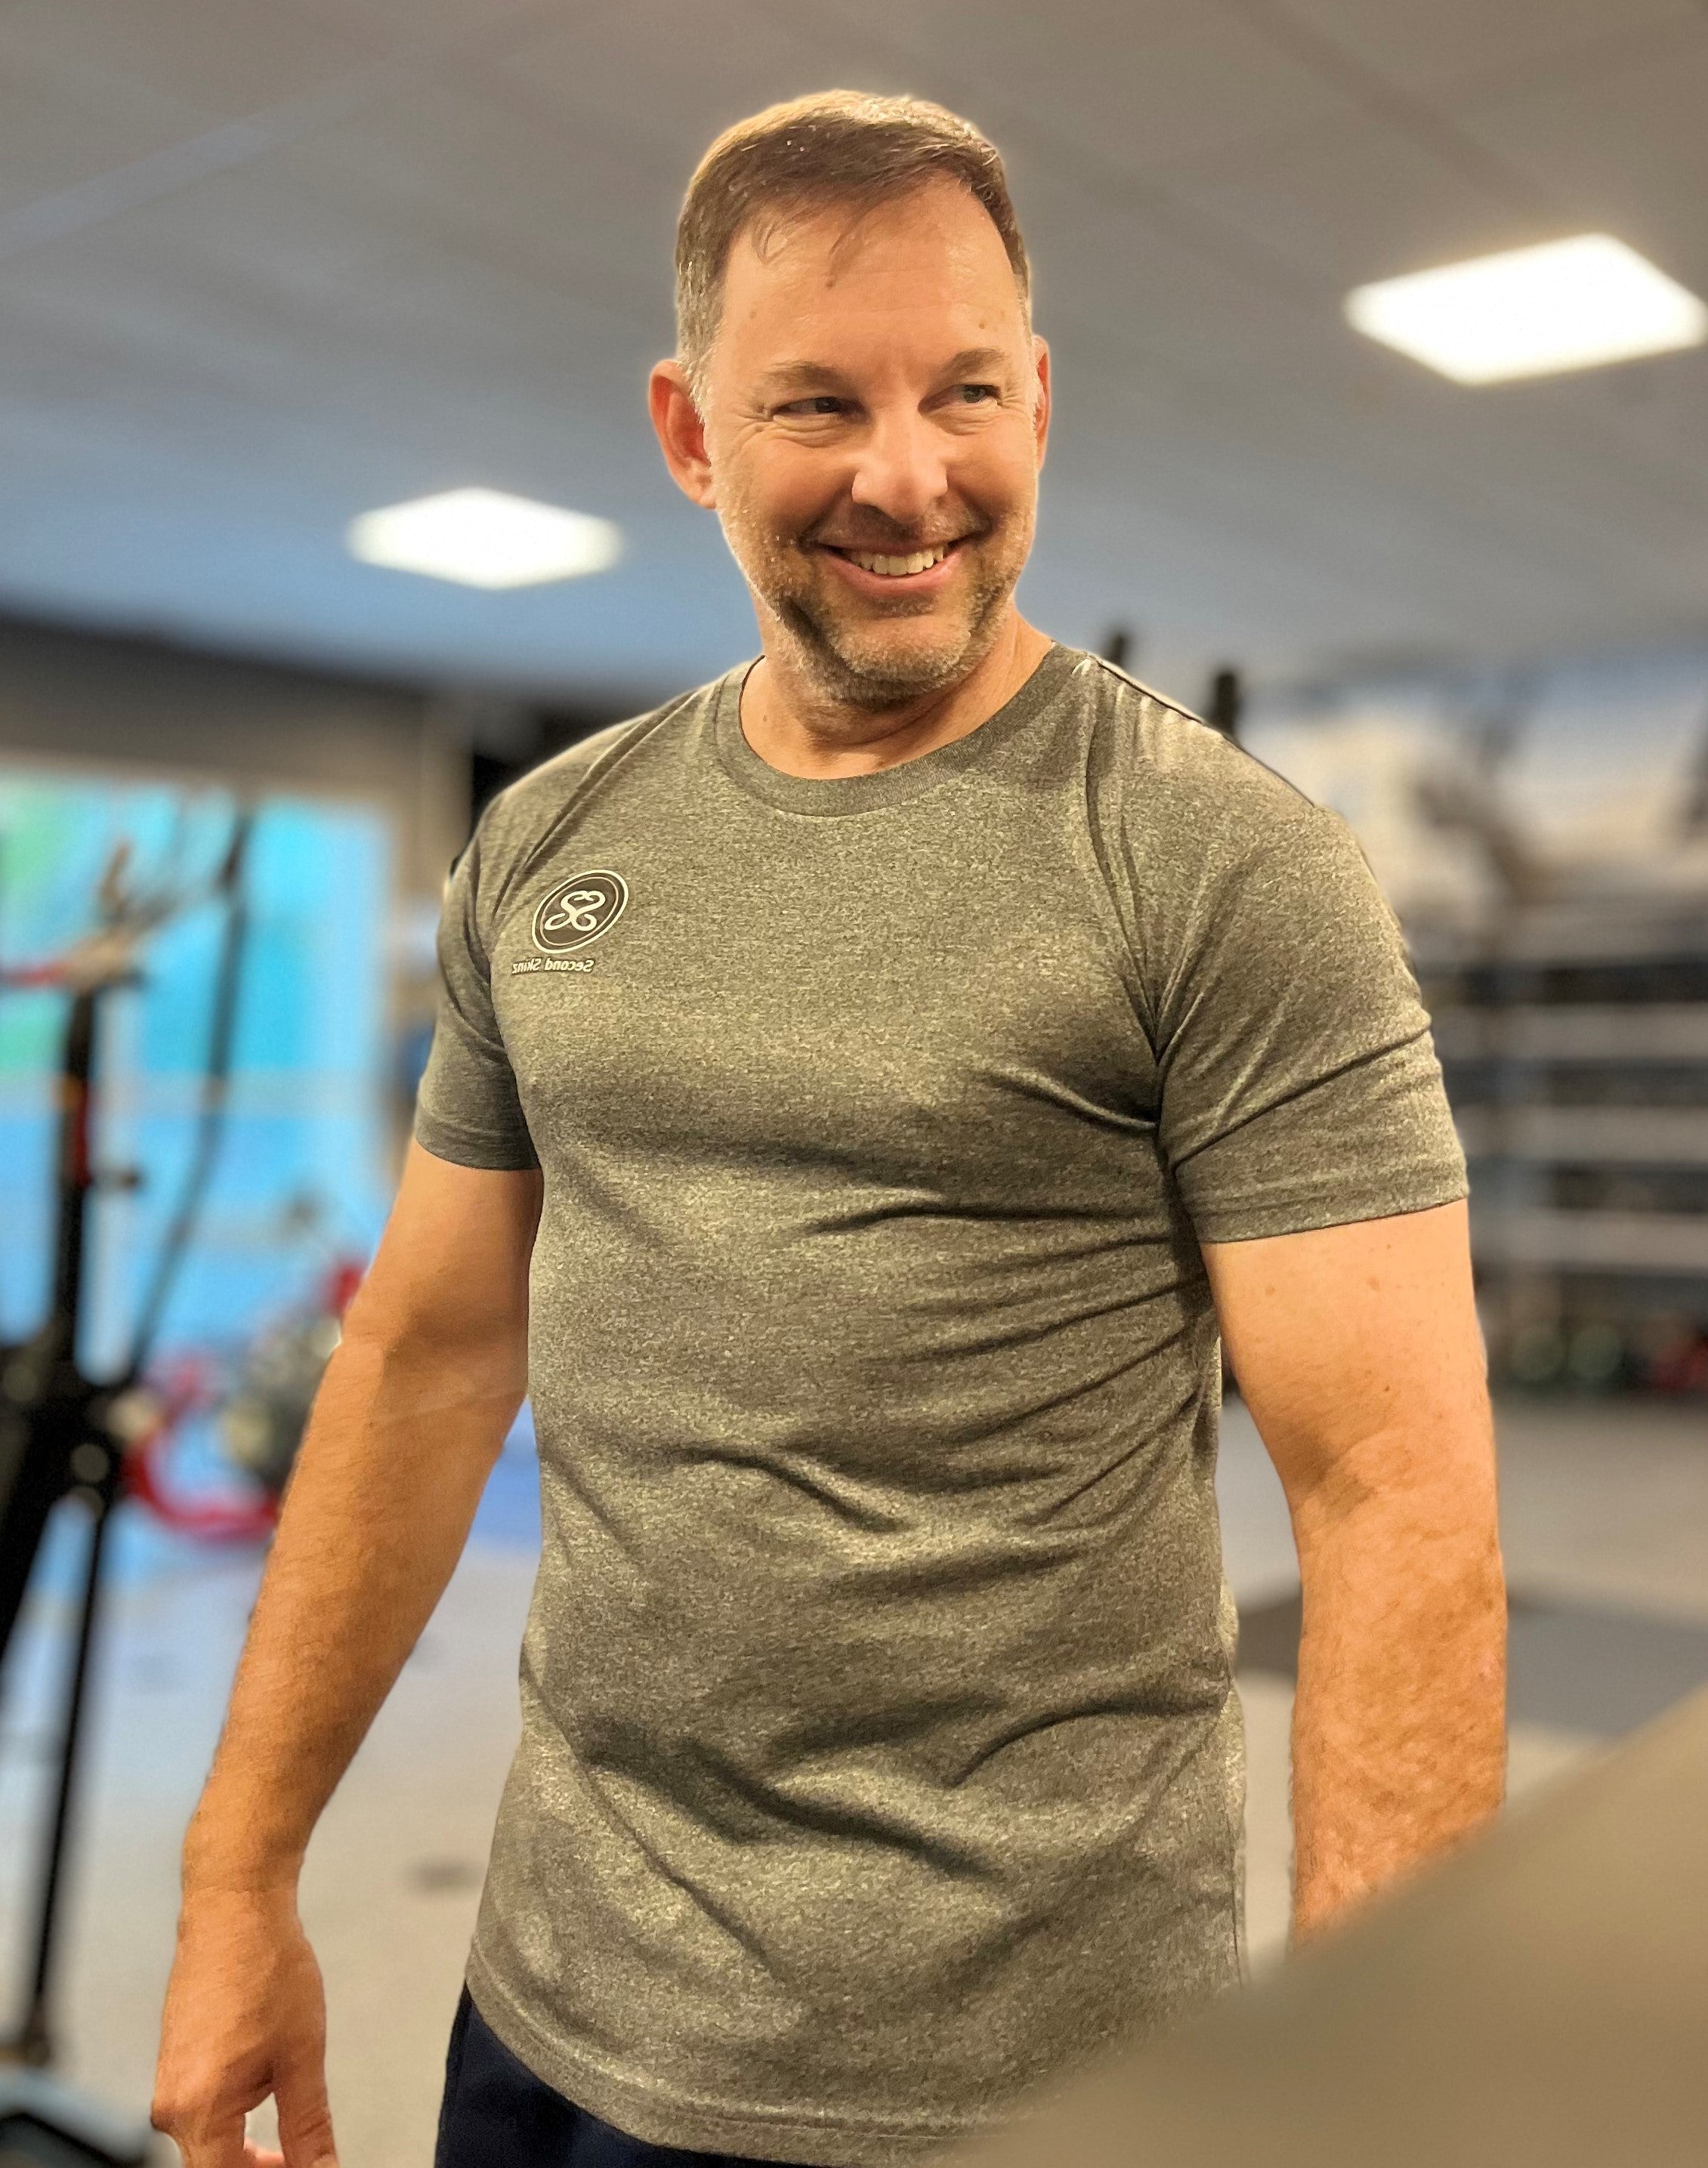 The Active Graphite T-Shirt from Second Skinz